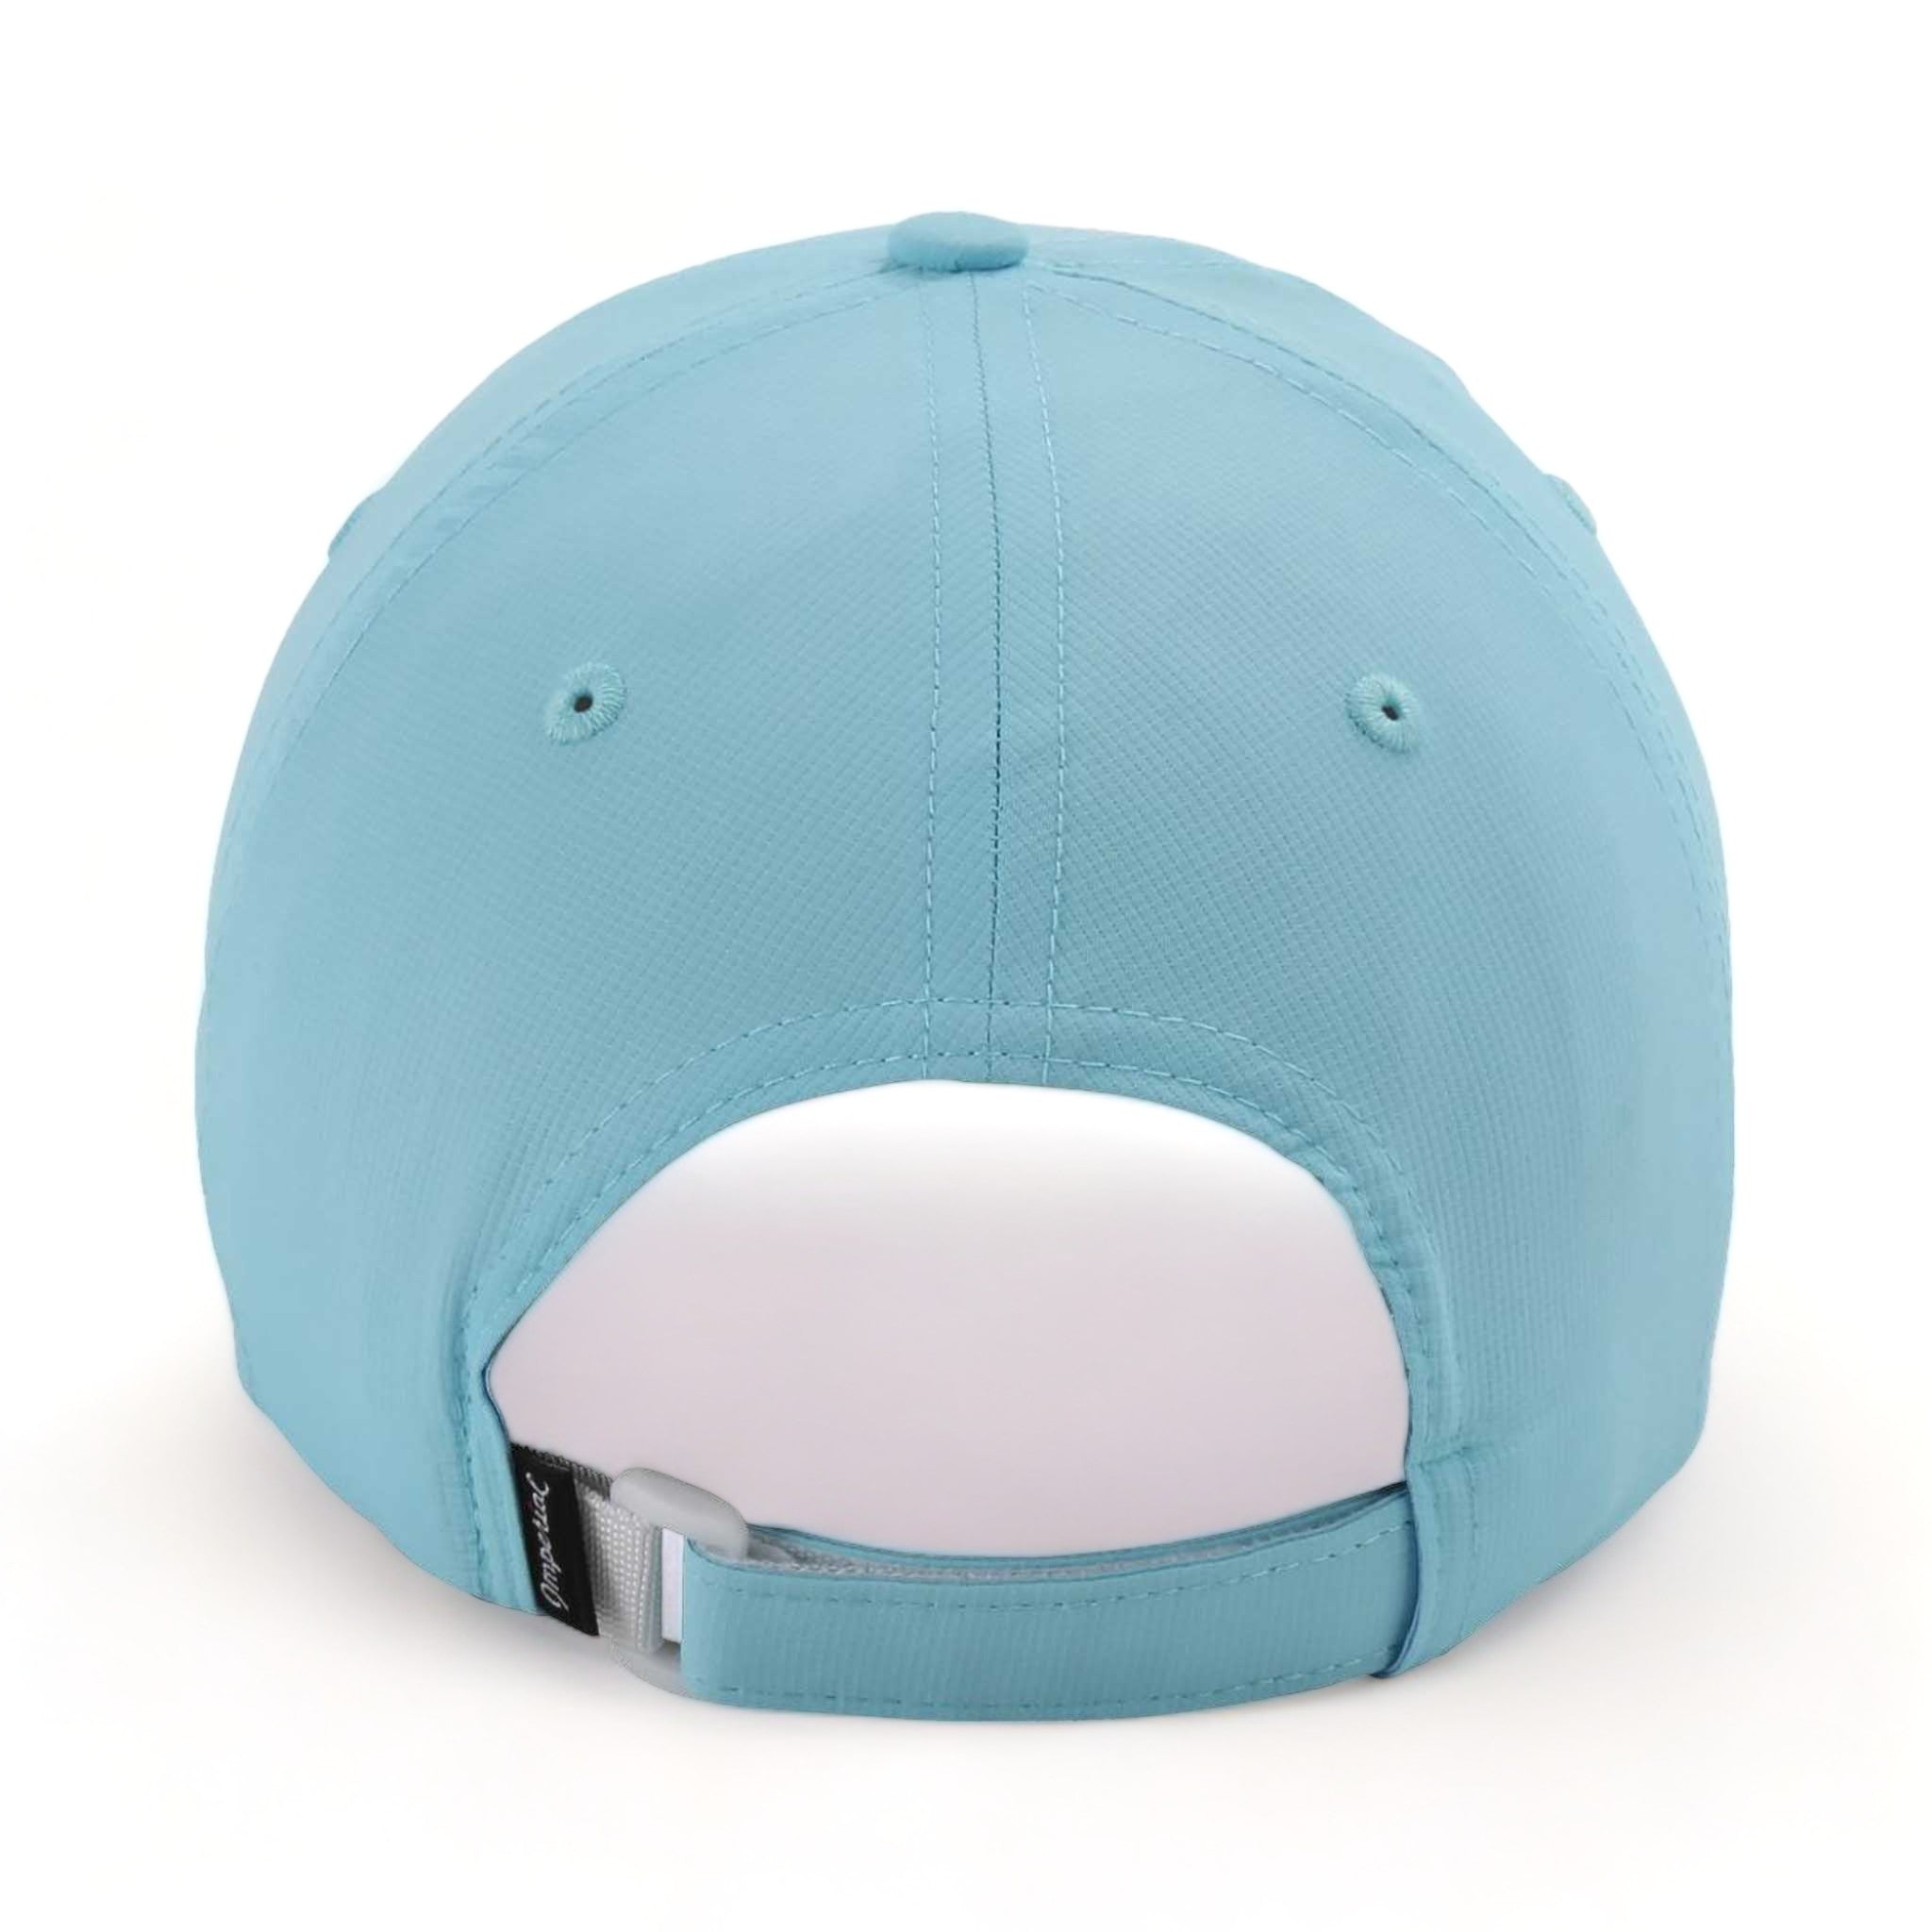 Back view of Imperial X210P custom hat in light blue